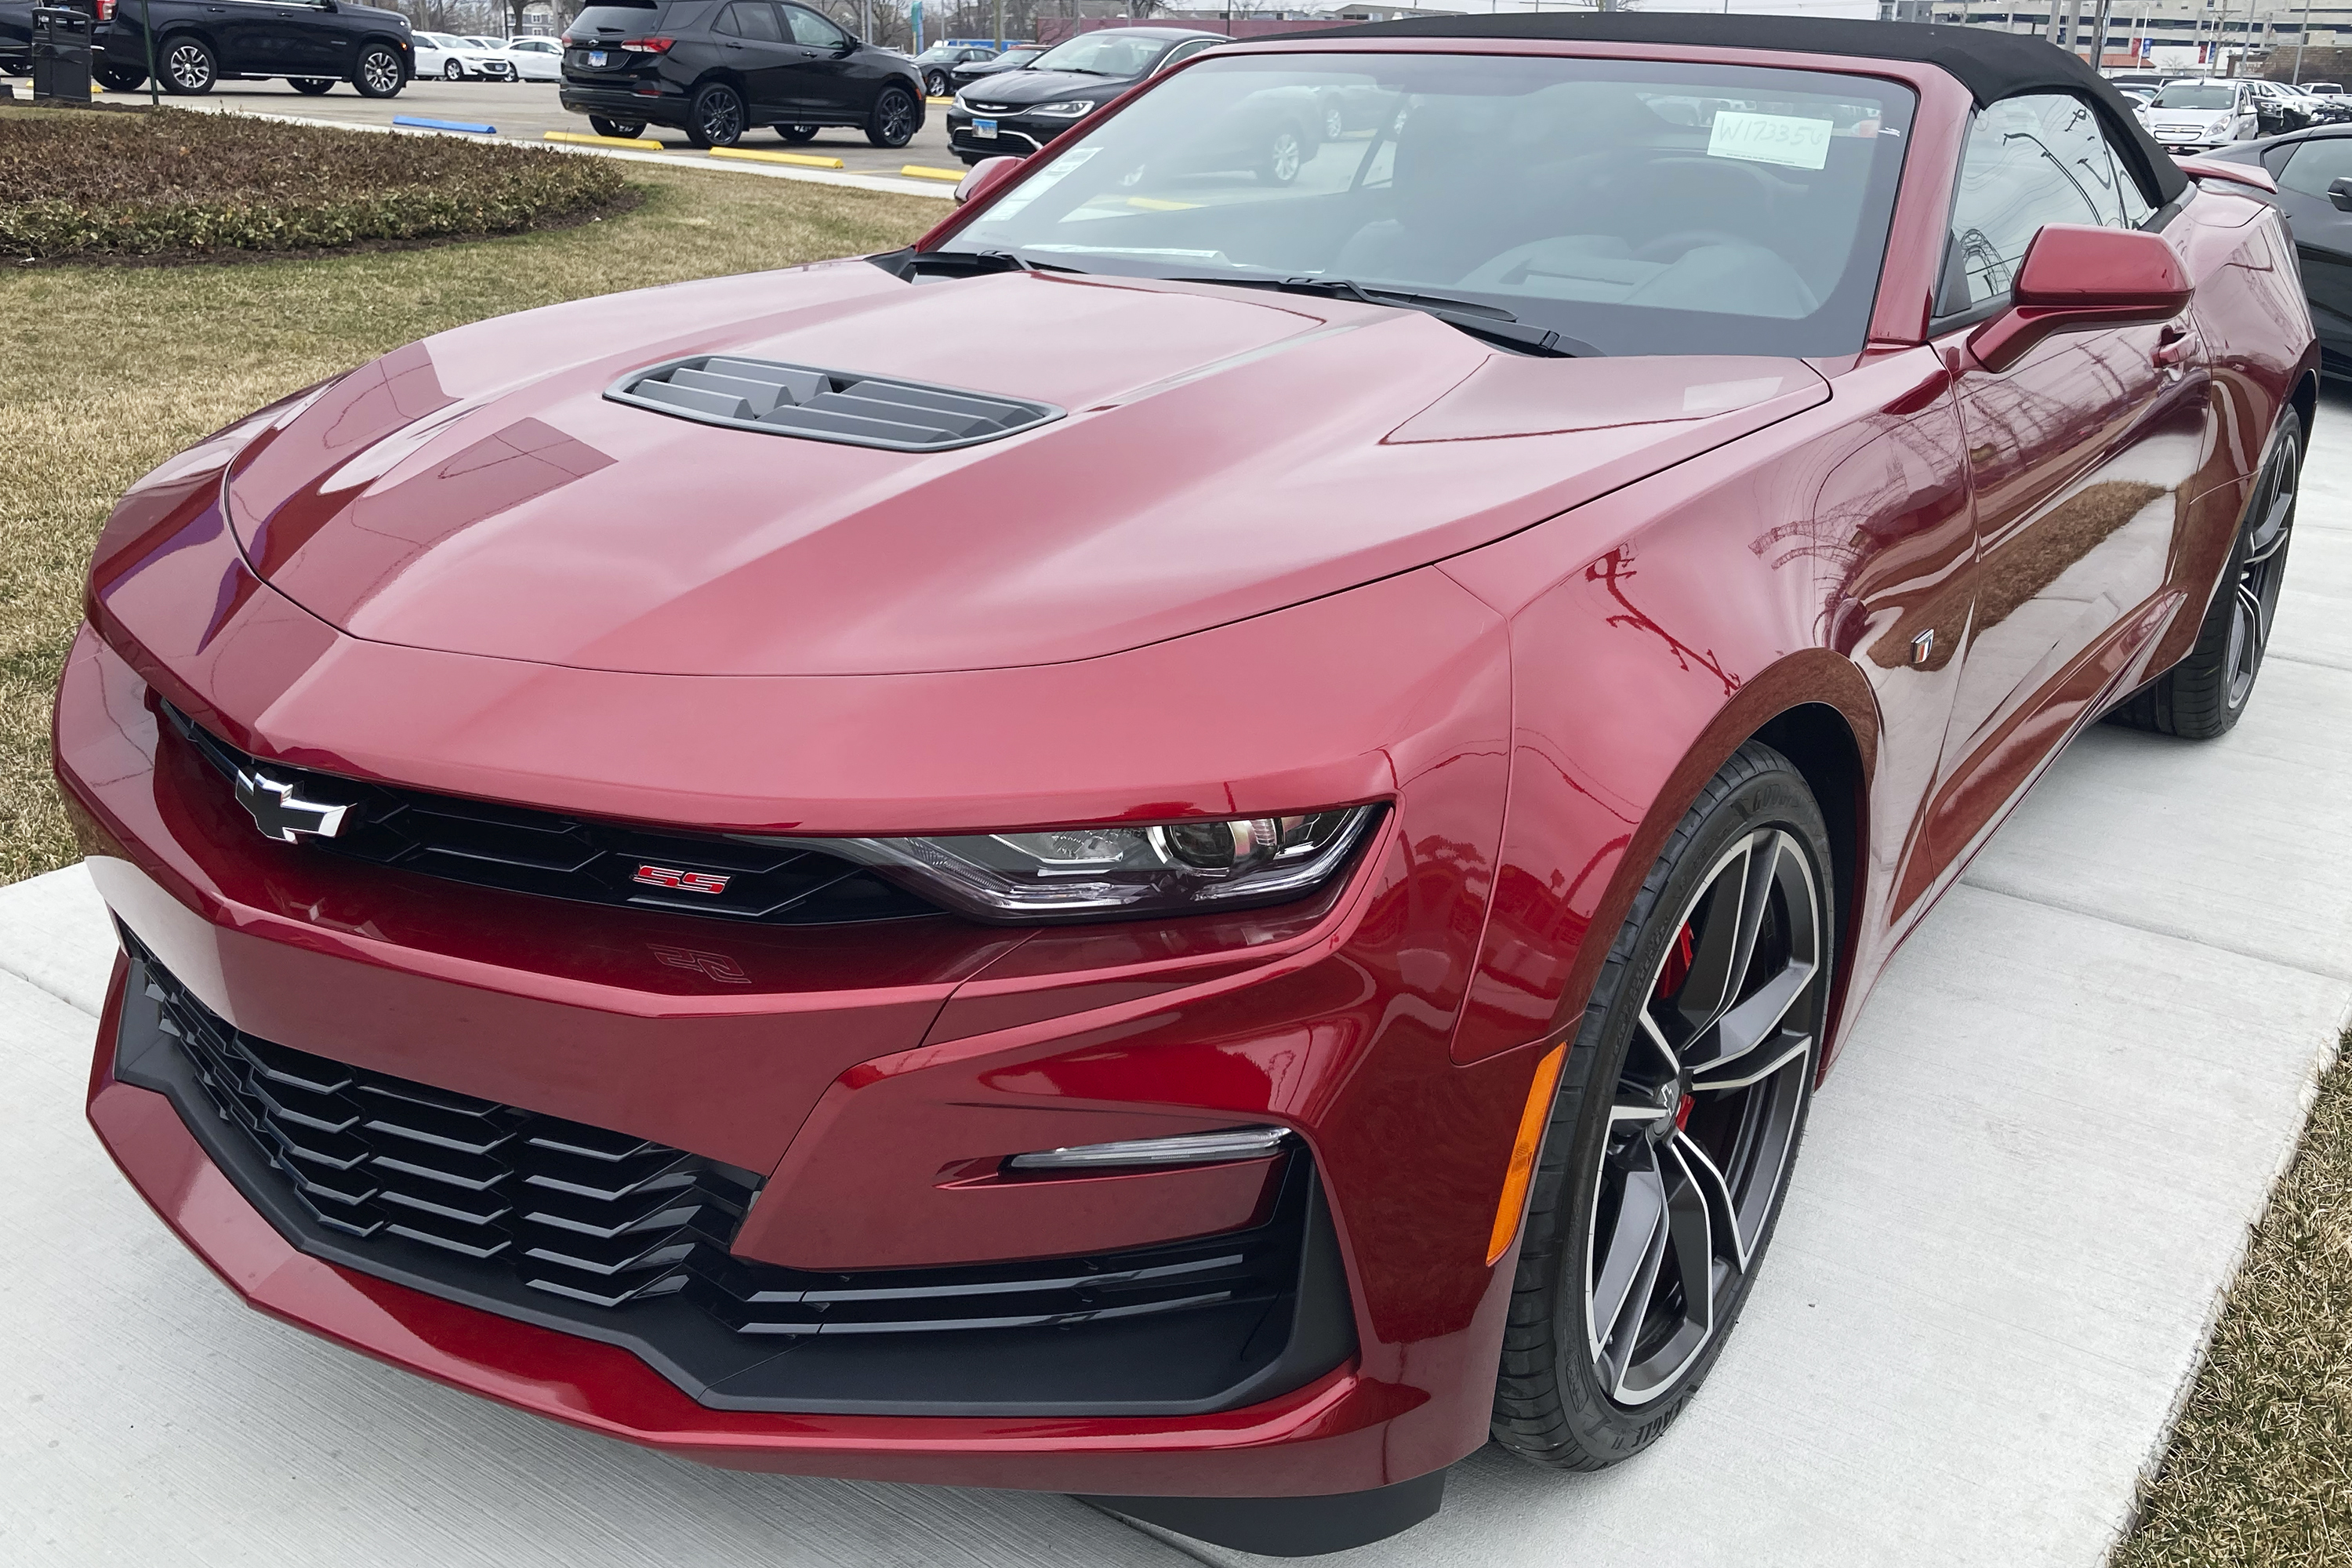 Chevrolet's Camaro SS may be world's best sport coupe